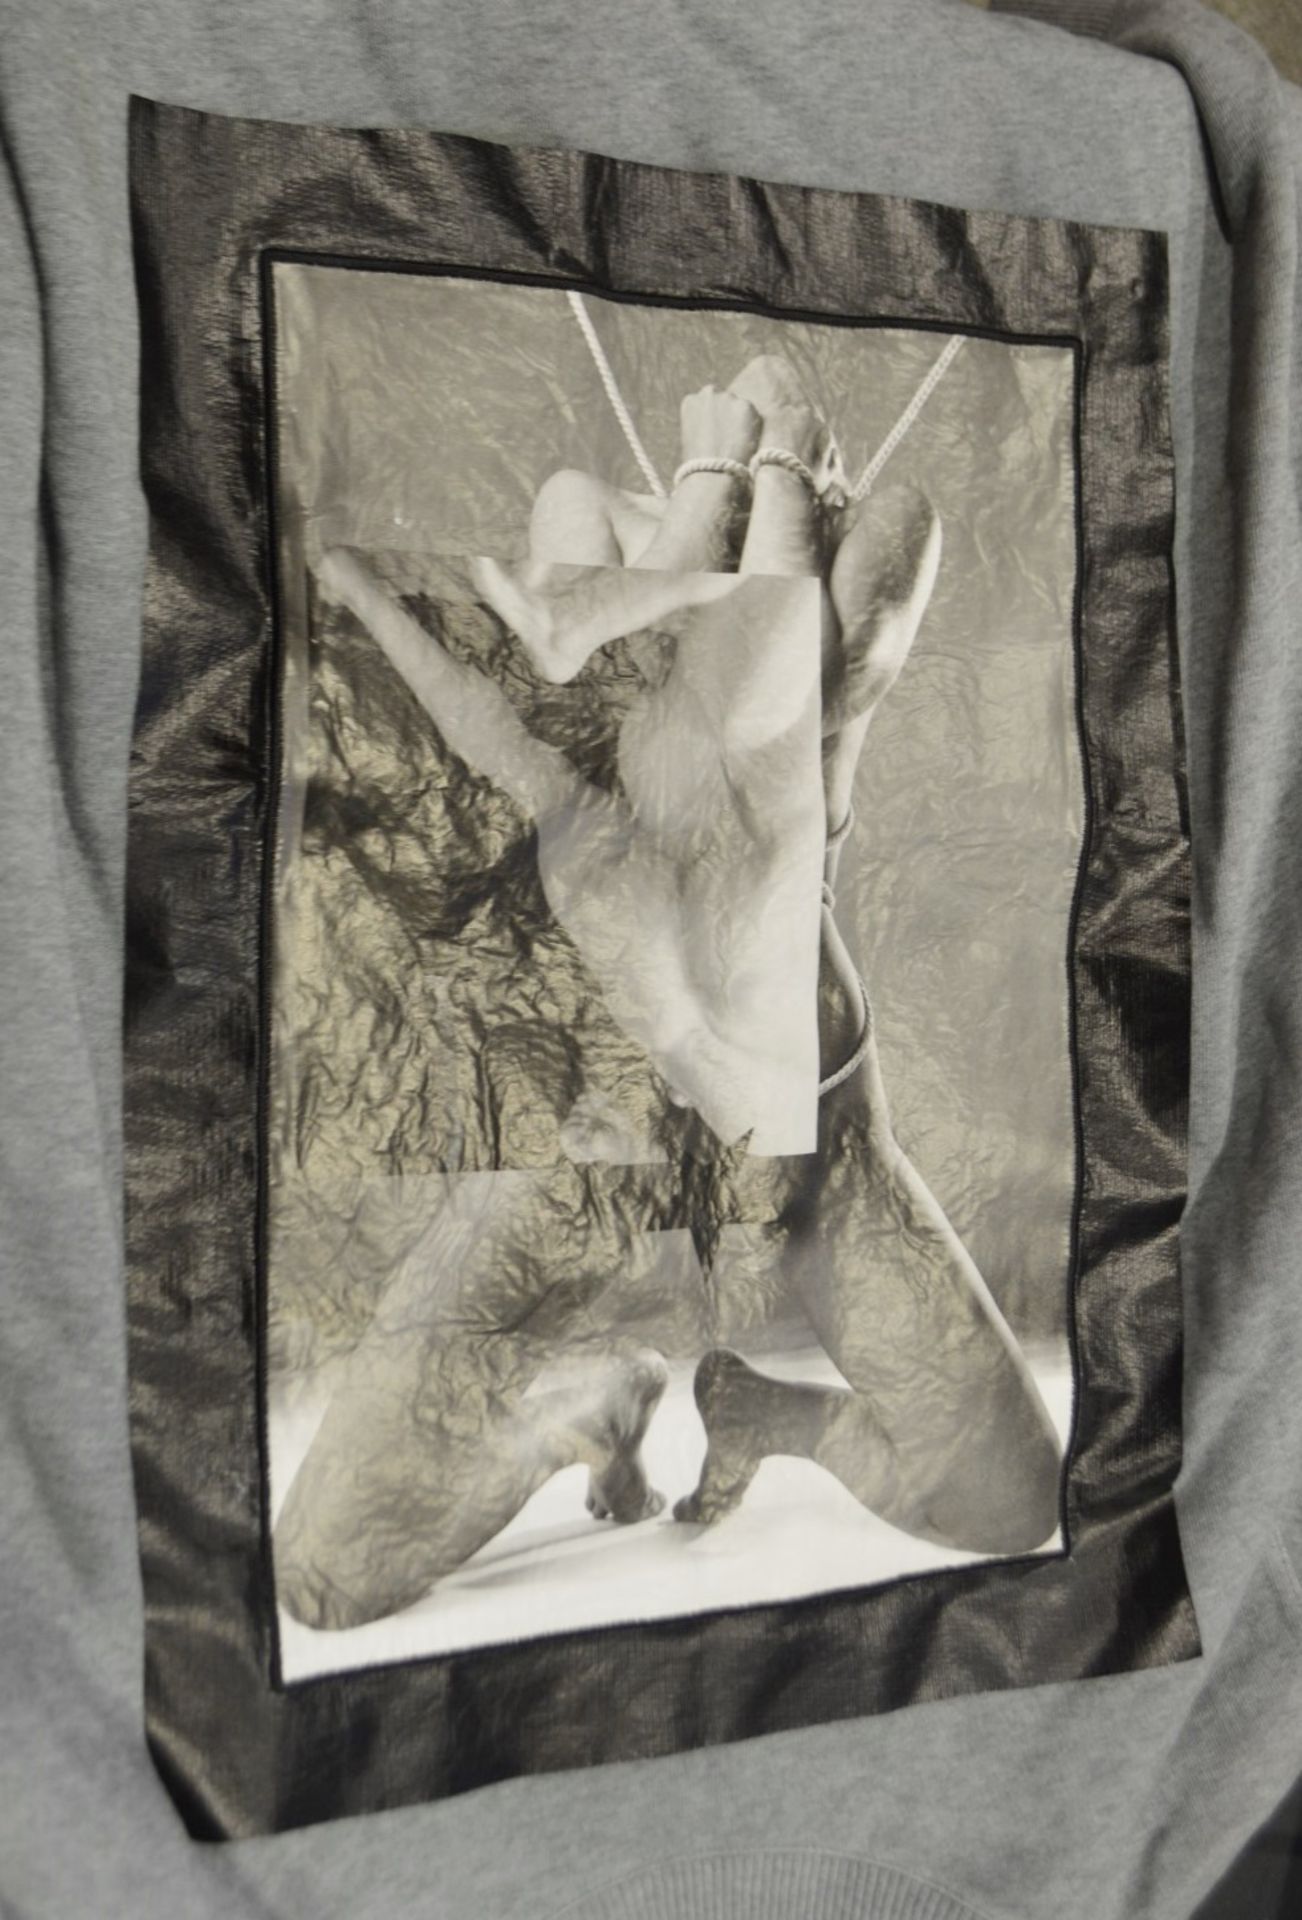 1 x Men's Genuine Givenchy Sweatshirt In Grey With Lambskin Panel On Front With Embroidered Border - Image 9 of 9